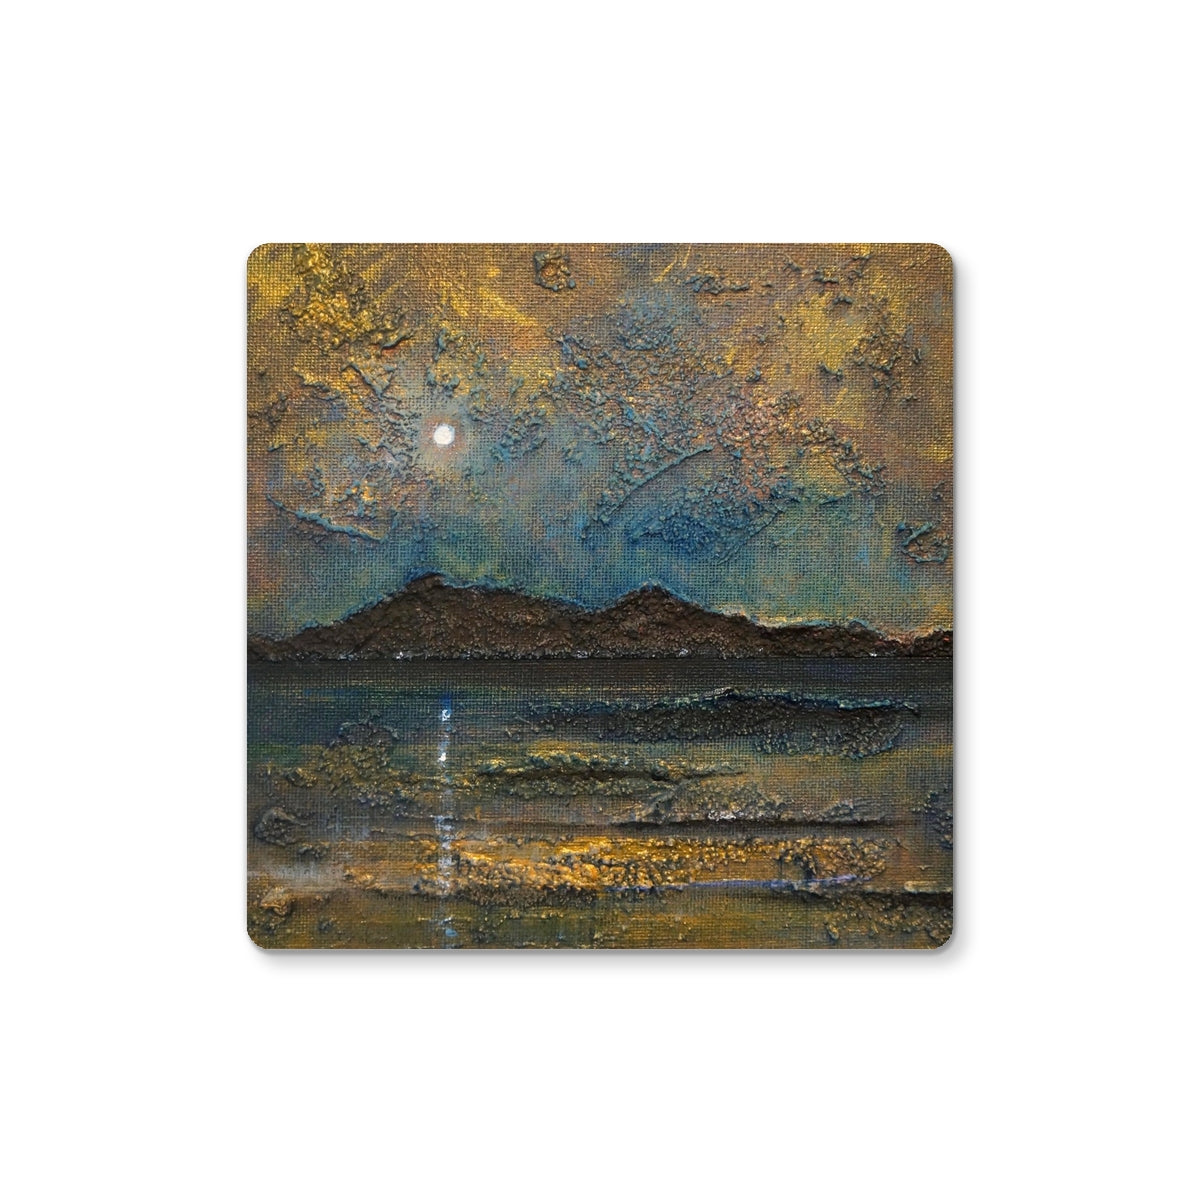 Arran Moonlight Art Gifts Coaster-Coasters-Arran Art Gallery-4 Coasters-Paintings, Prints, Homeware, Art Gifts From Scotland By Scottish Artist Kevin Hunter